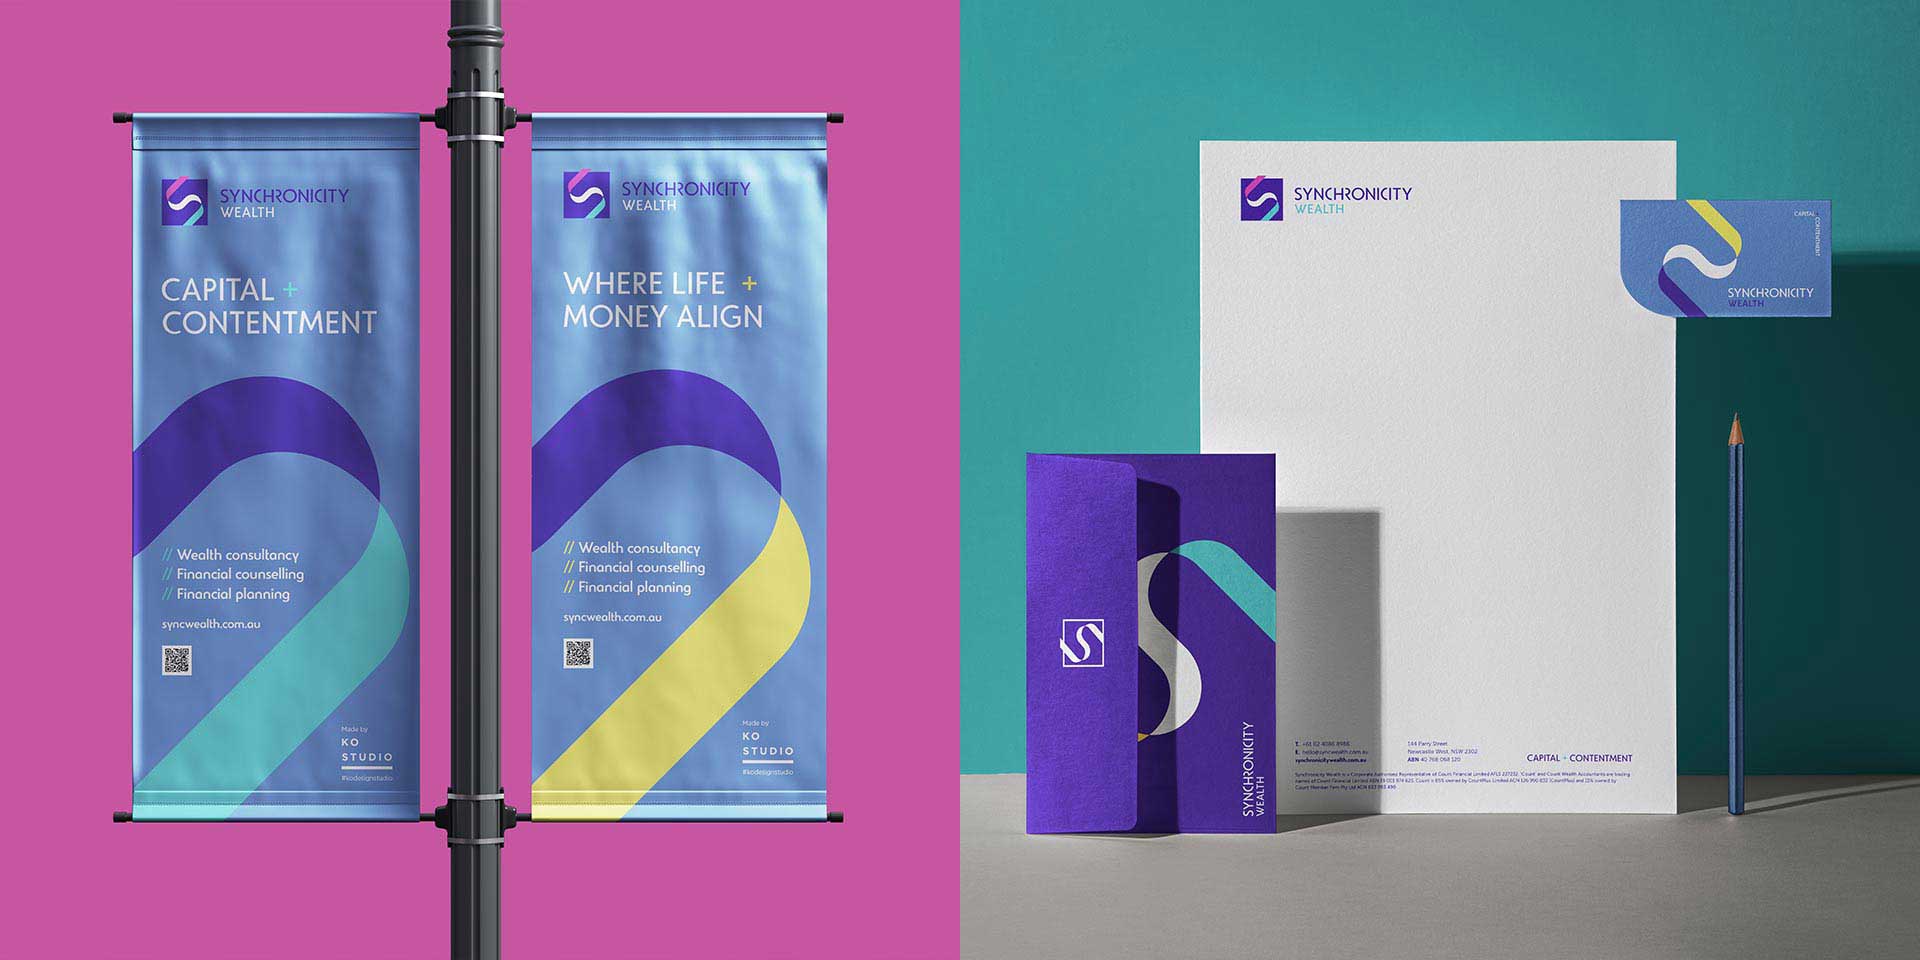 Synchronicity Wealth Corporate banner and stationery design